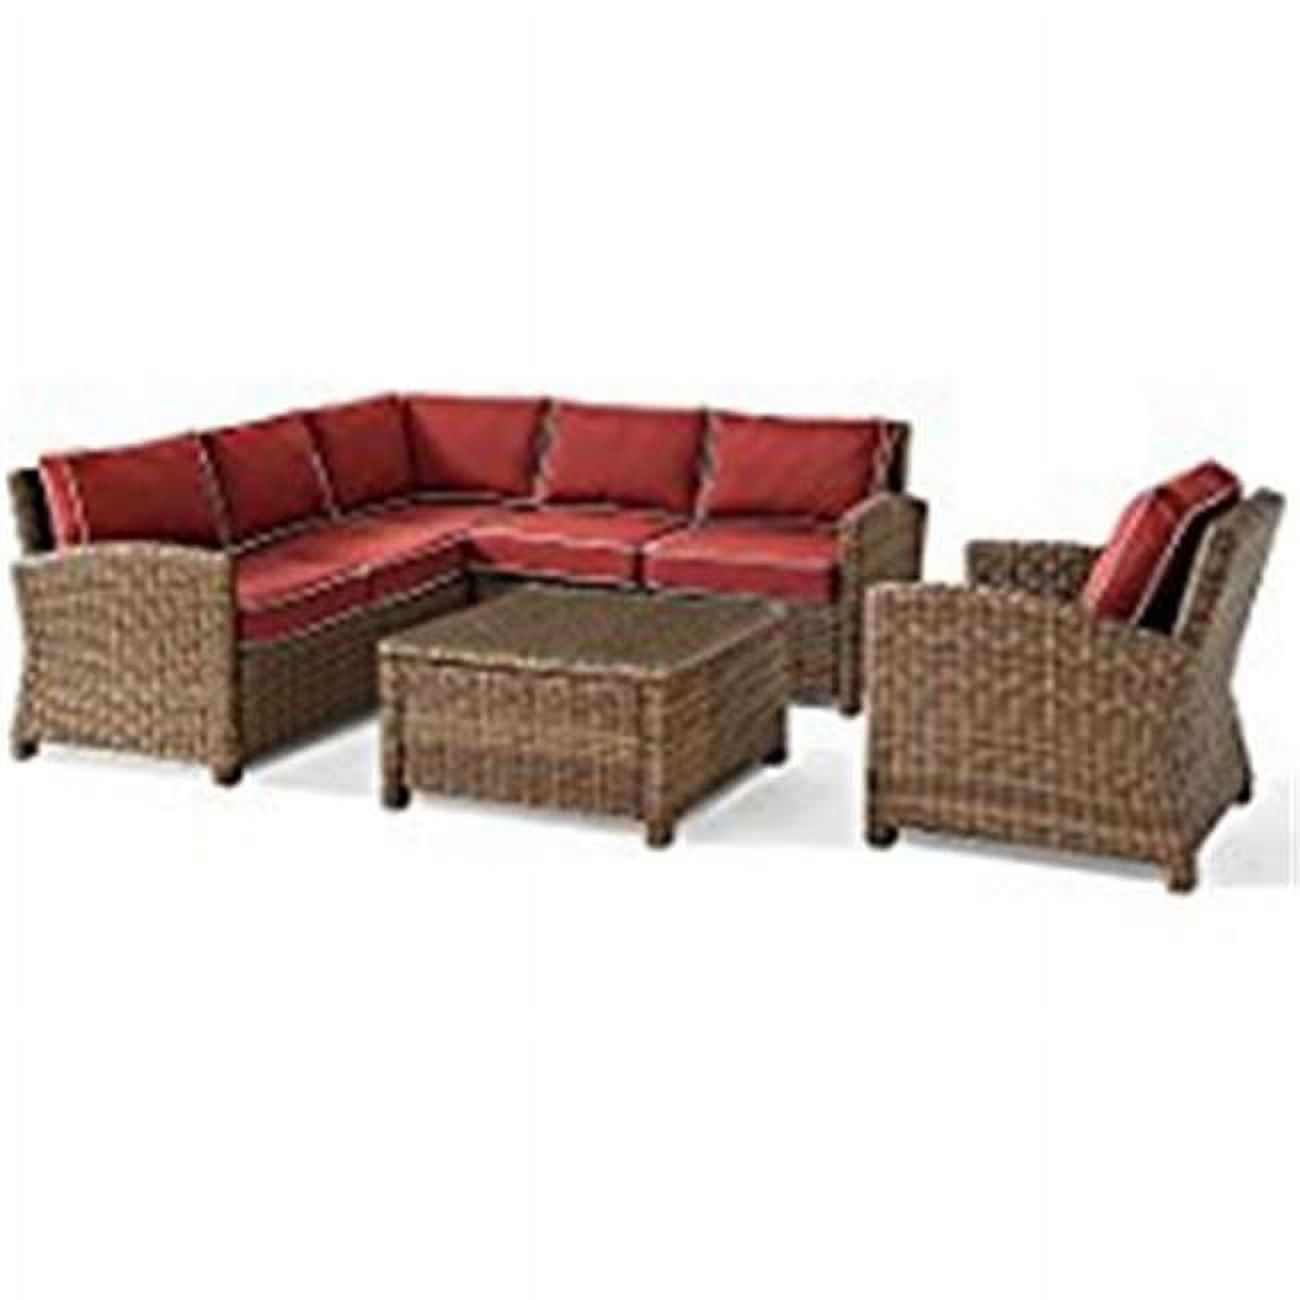 Crosley Furniture Bradenton 5 Pc Fabric Patio Sectional Set in Sangria Red - image 1 of 10